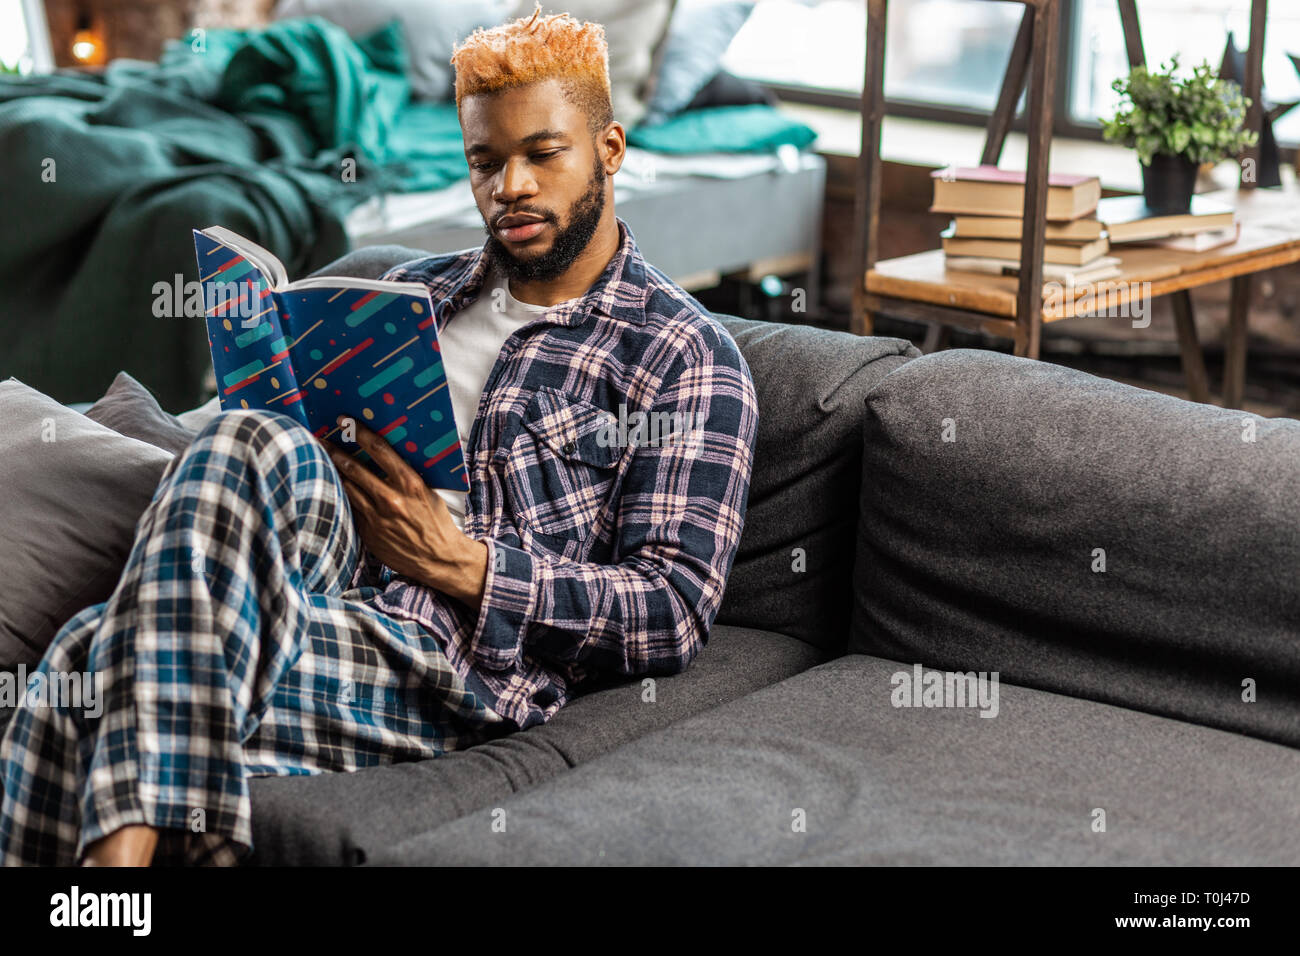 Nice African American man holding a book Stock Photo